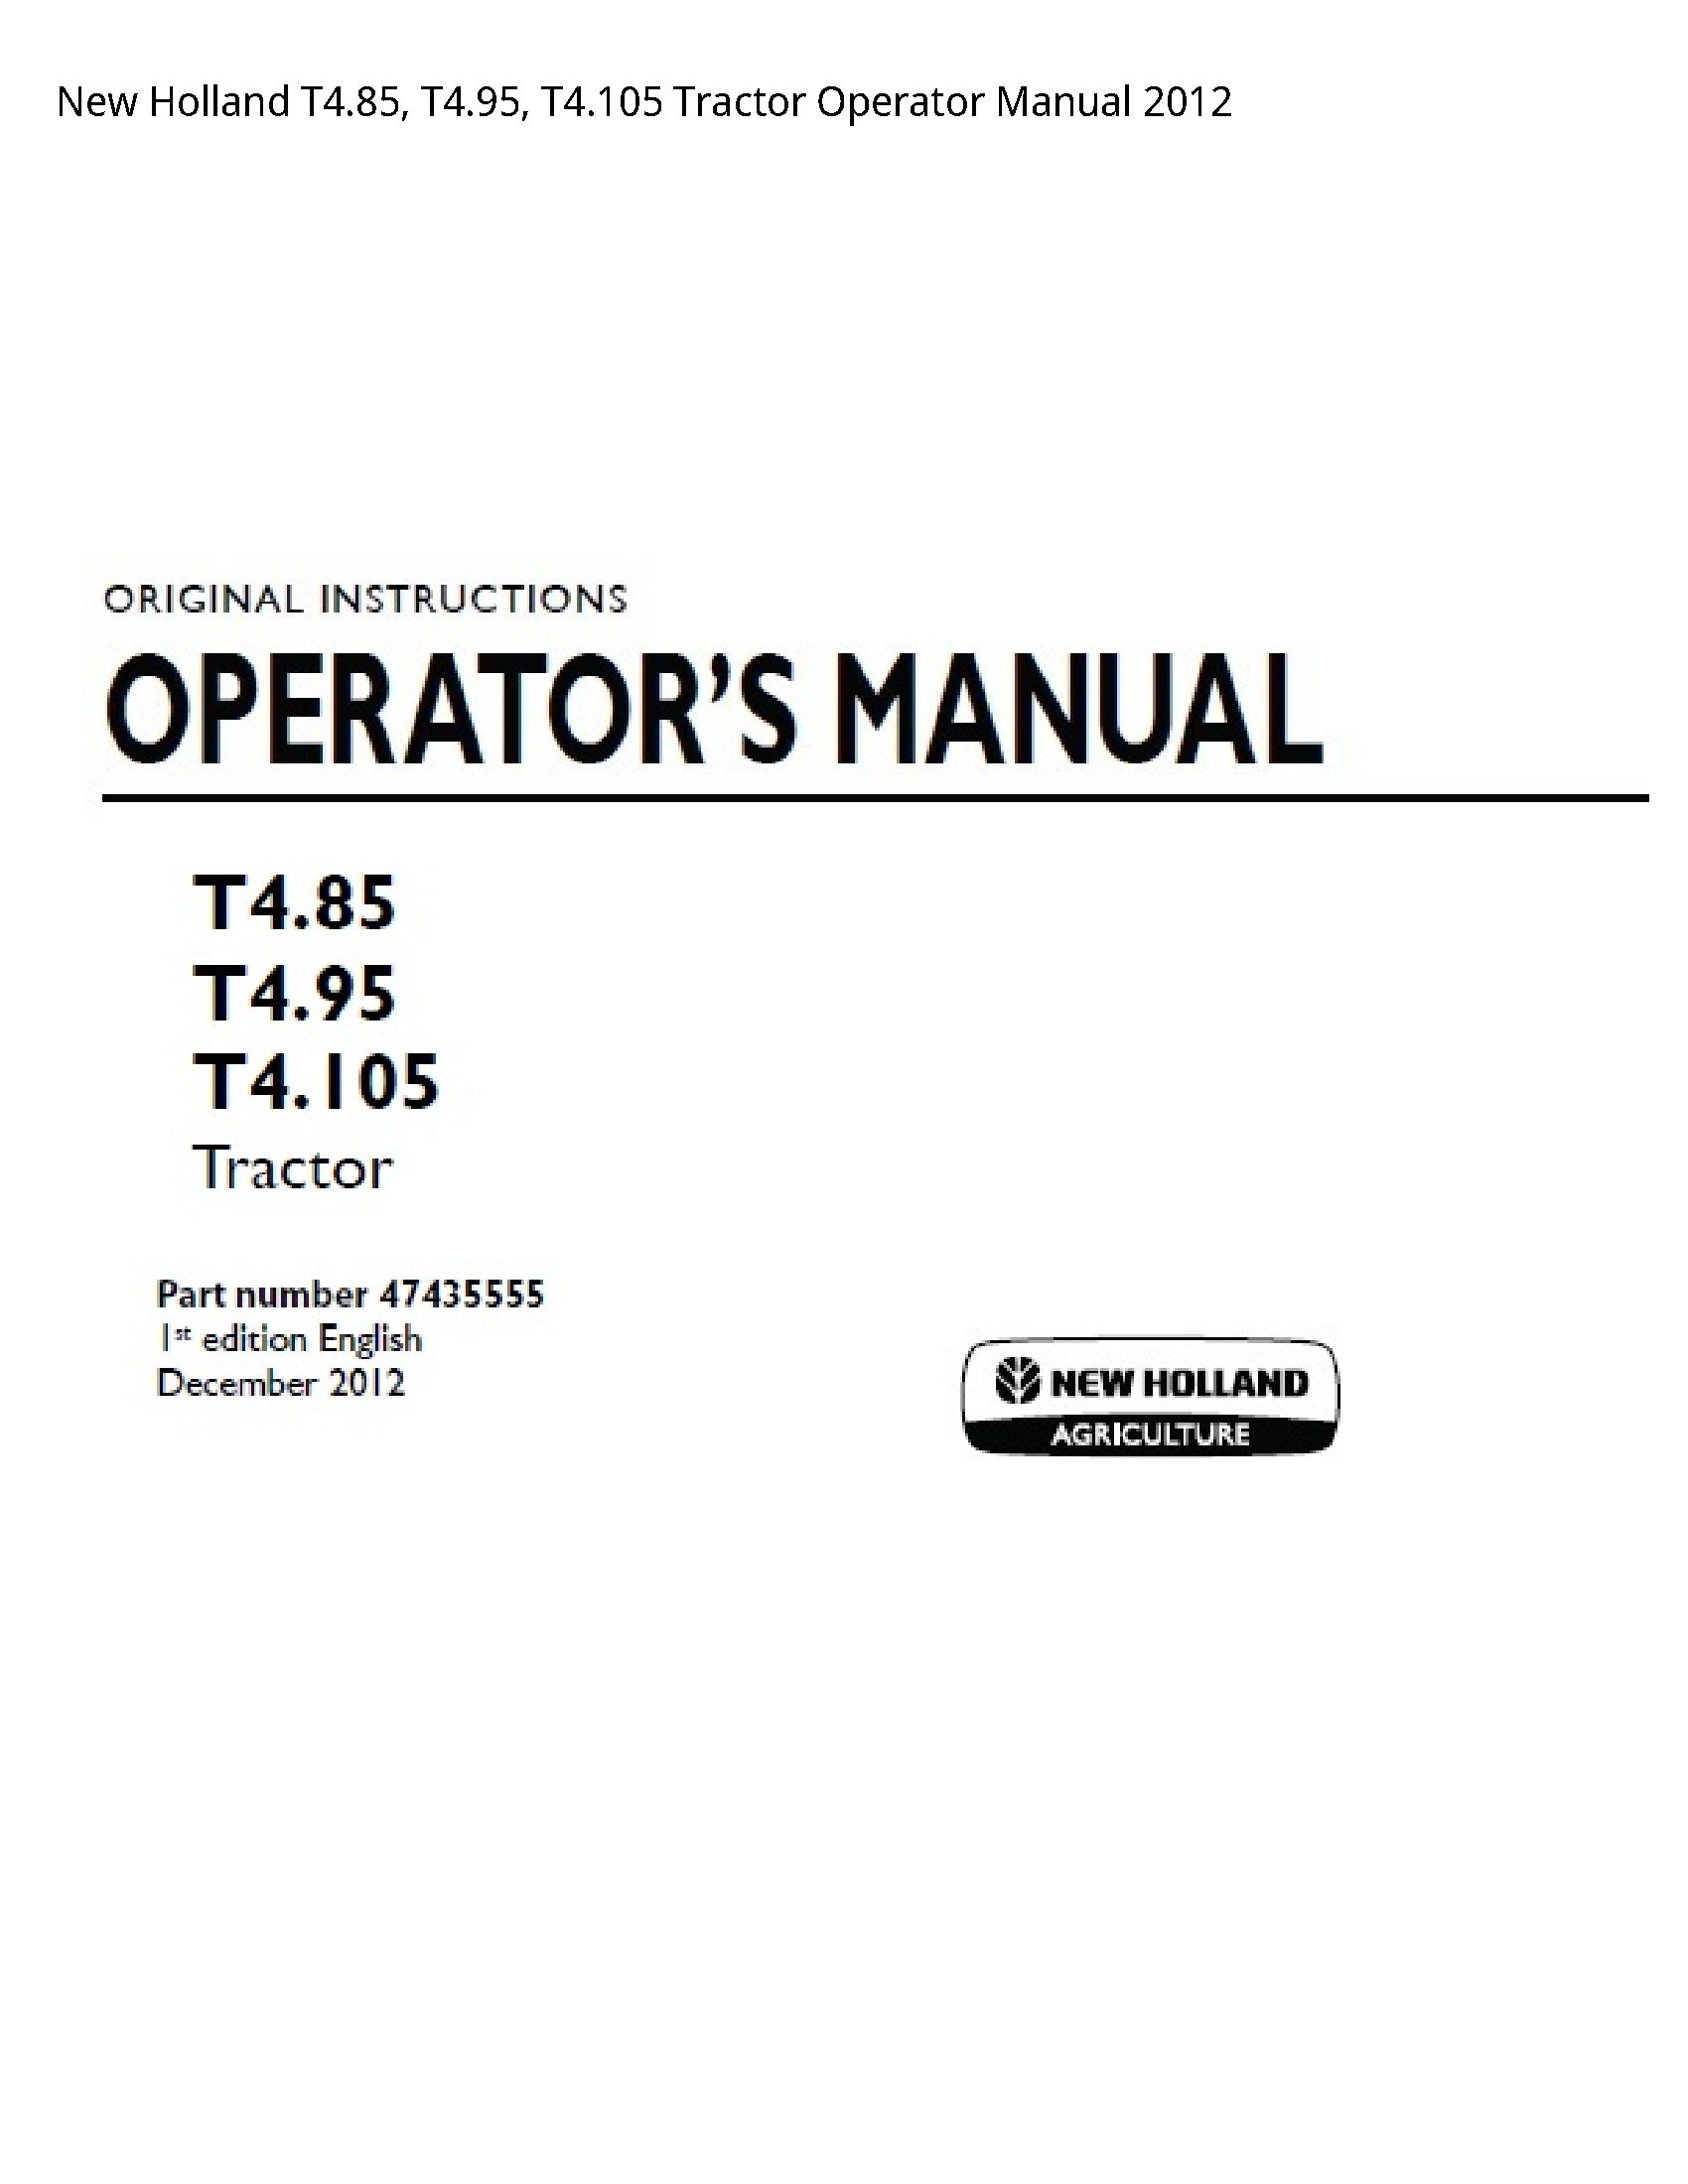 New Holland T4.85 Tractor Operator manual